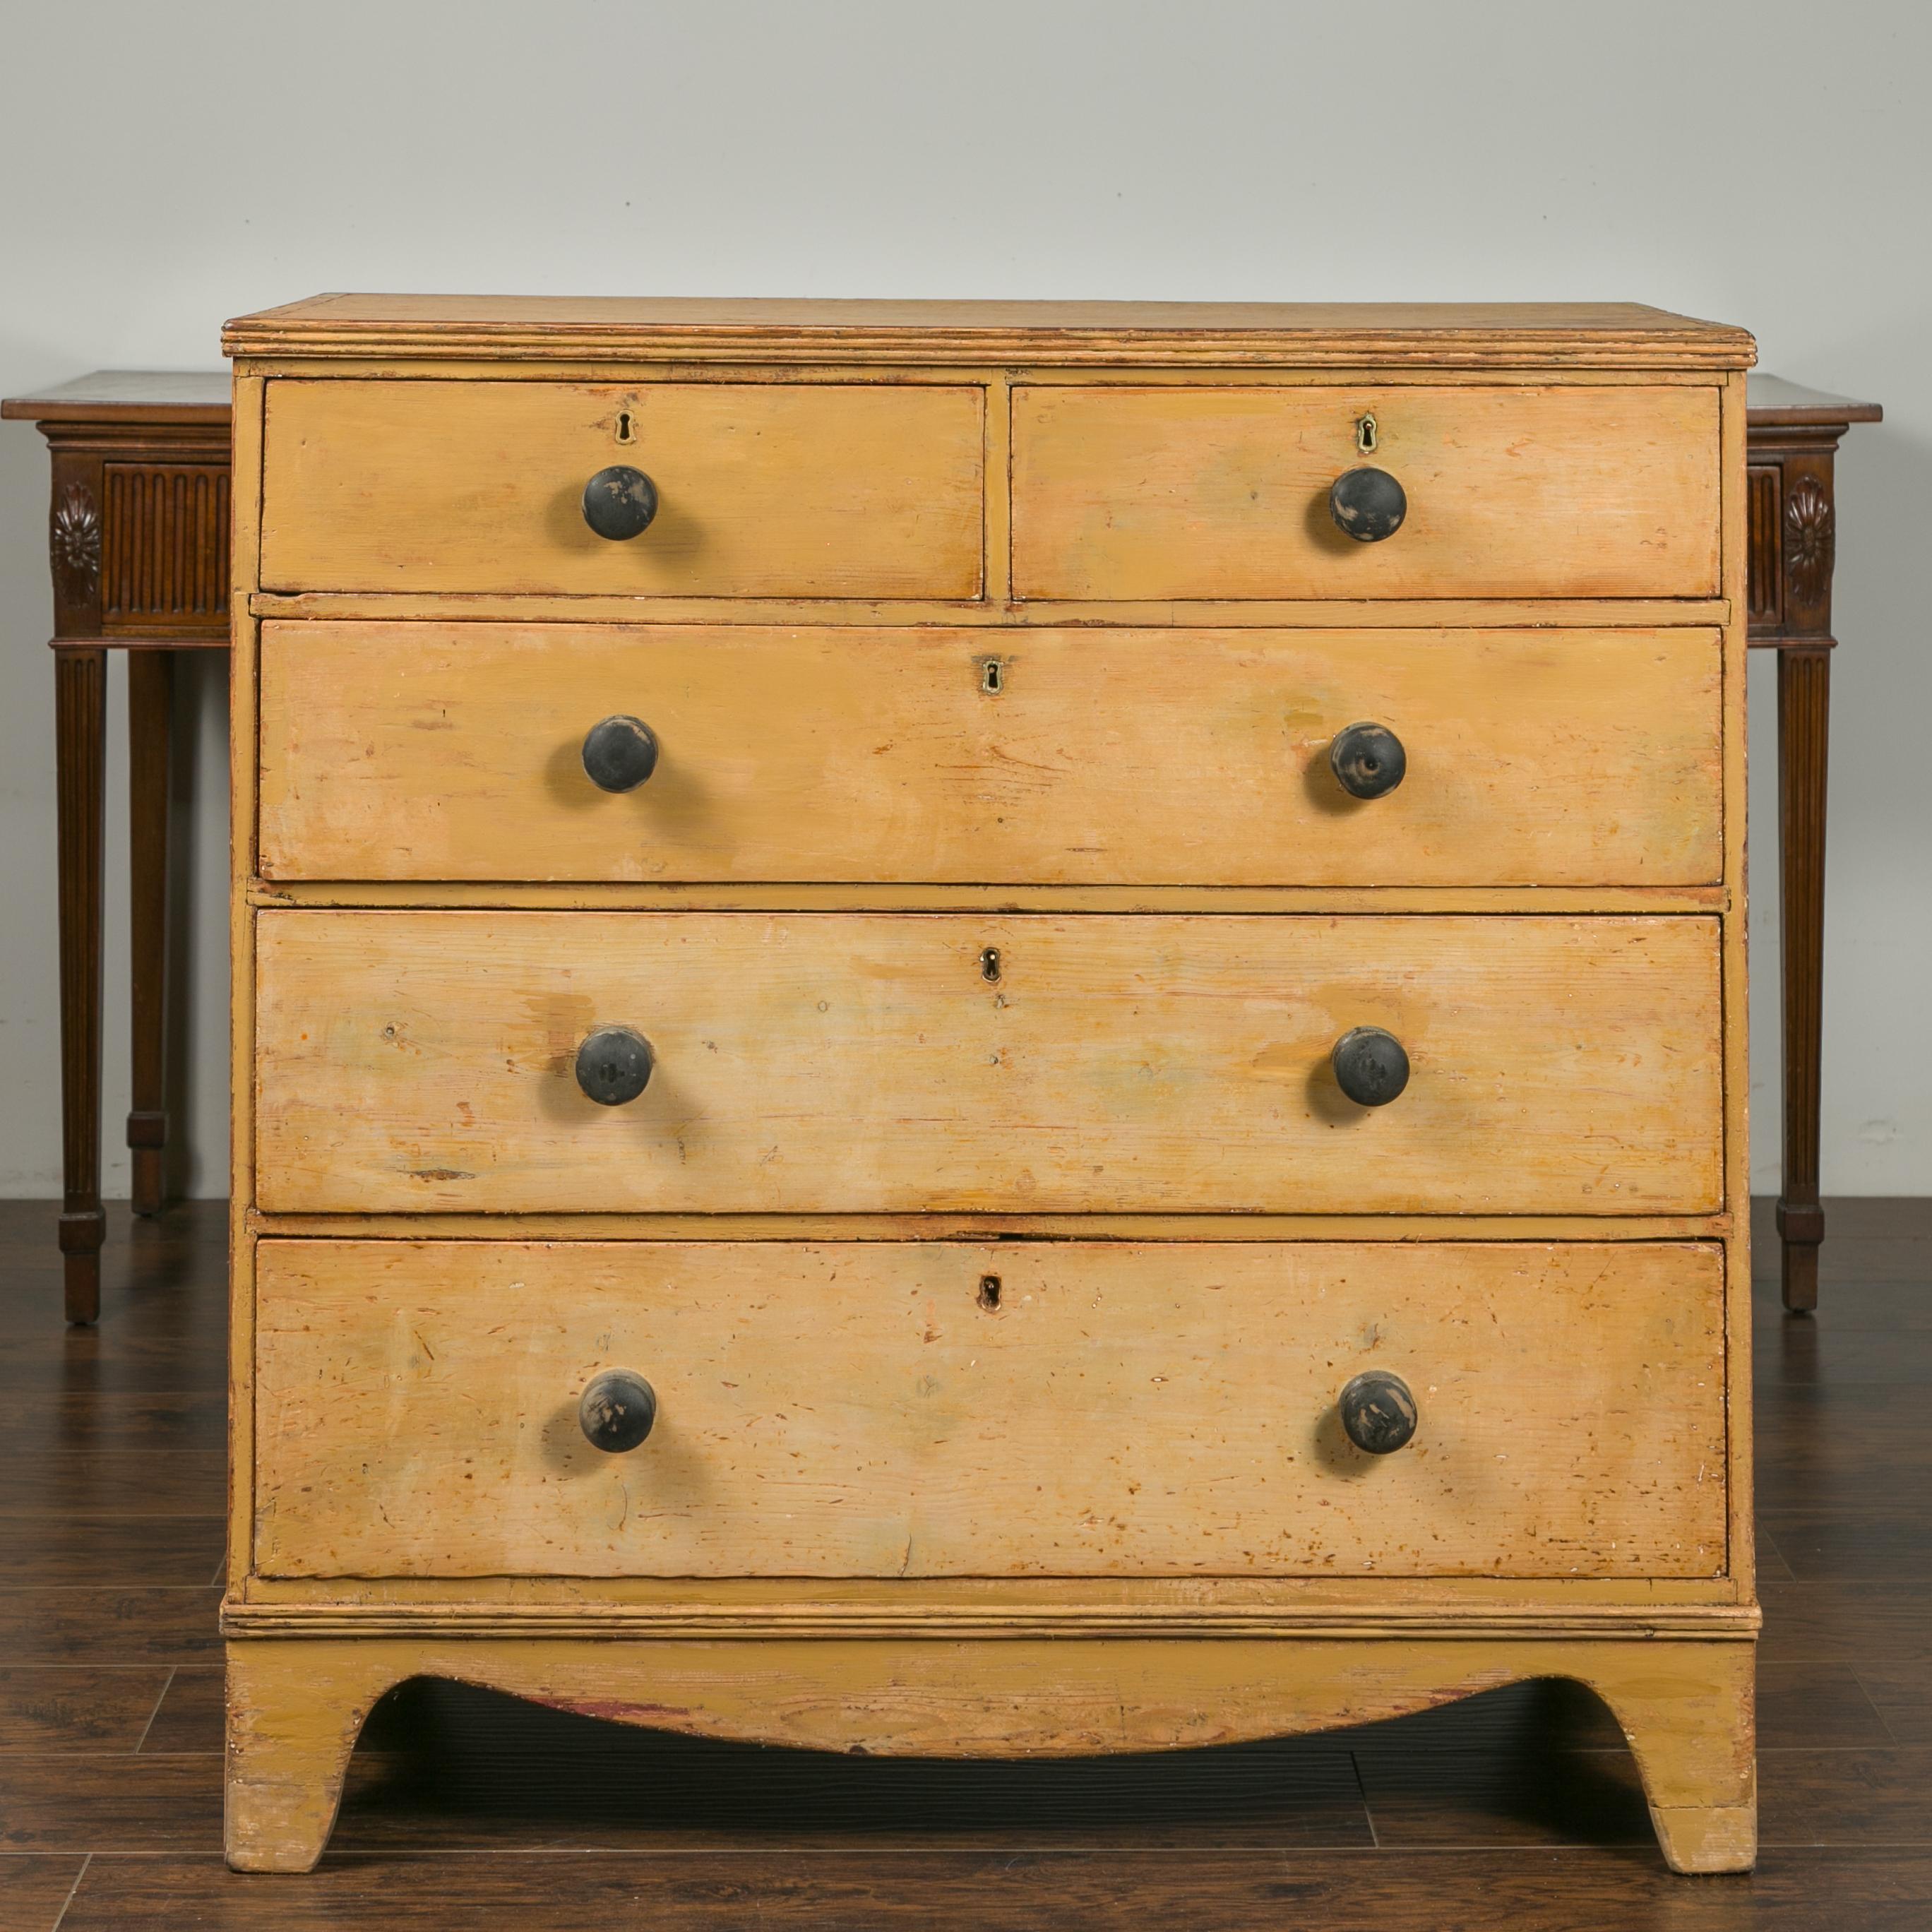 An English pine chest from the mid-19th century, with five drawers and valanced apron. Born in England during the third quarter of the 19th century, this pine chest features a rectangular top with nicely worn appearance and reeded edges, sitting